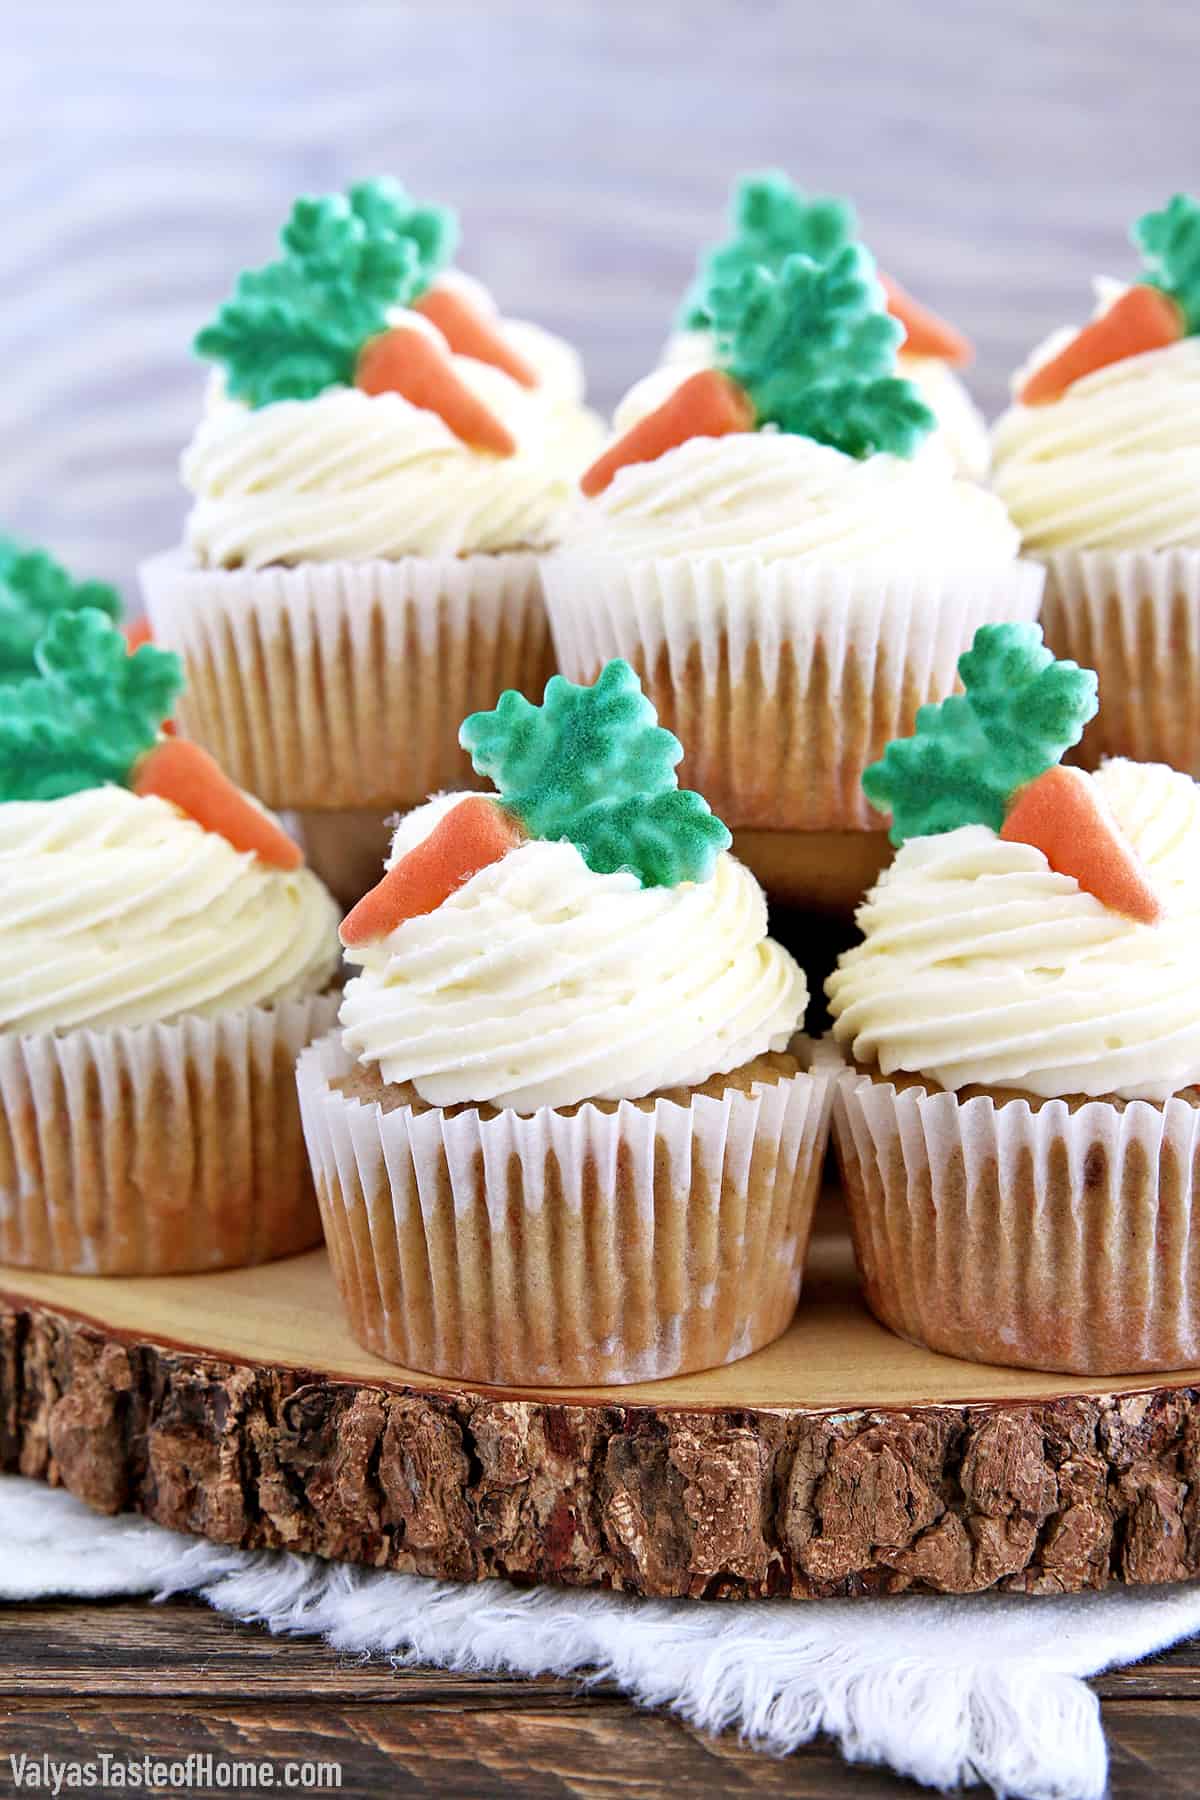 These The Best Carrot Cake Cupcakes are moist, fluffy, and spongy soft, delicious cupcakes you'll ever try. They are made completely from scratch, down to the freshly grated carrots, and topped with a generous swirl of the absolute best cream cheese frosting!